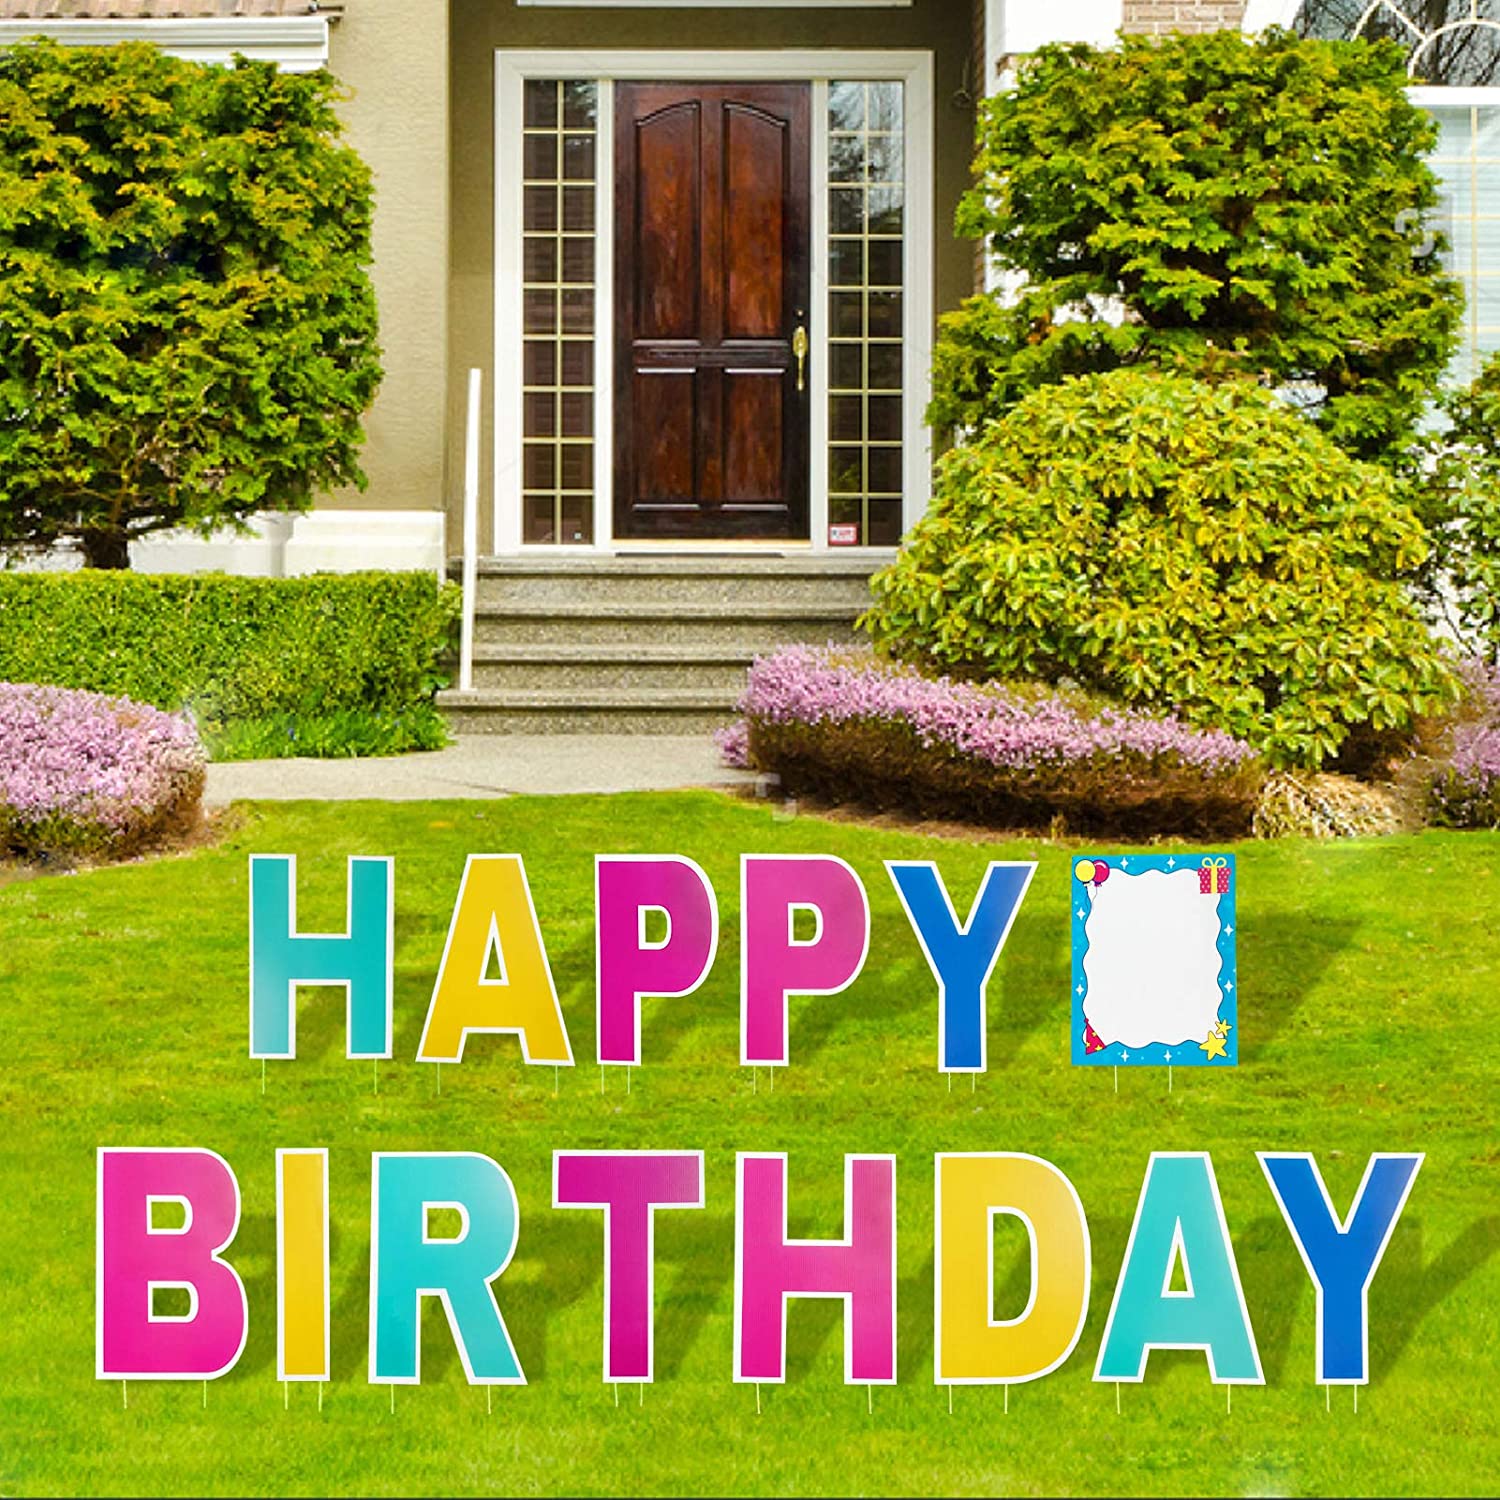 Premium 16-Inch <a href='/happy-birthday-yard/'>Happy Birthday Yard</a> Sign - Factory Direct, Colorful Lawn Decor with Stakes - Waterproof Outdoor Party Supplies